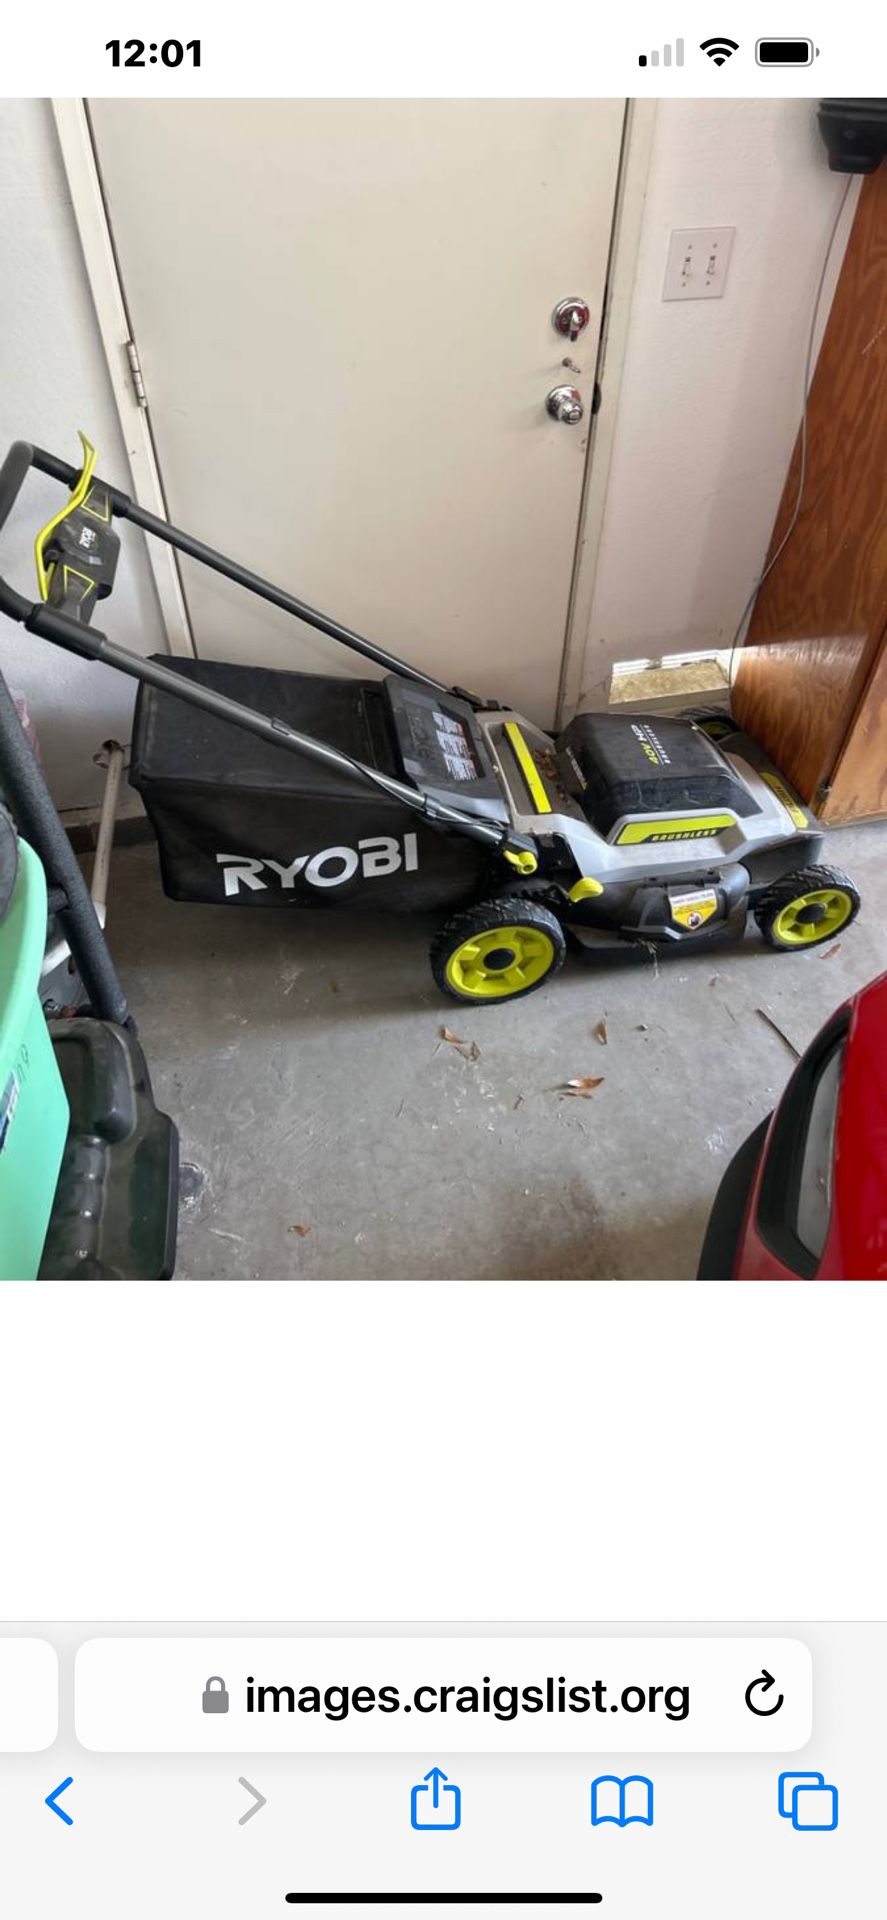 Ryobi Weed eater, Battery, Charger, and Extra String 